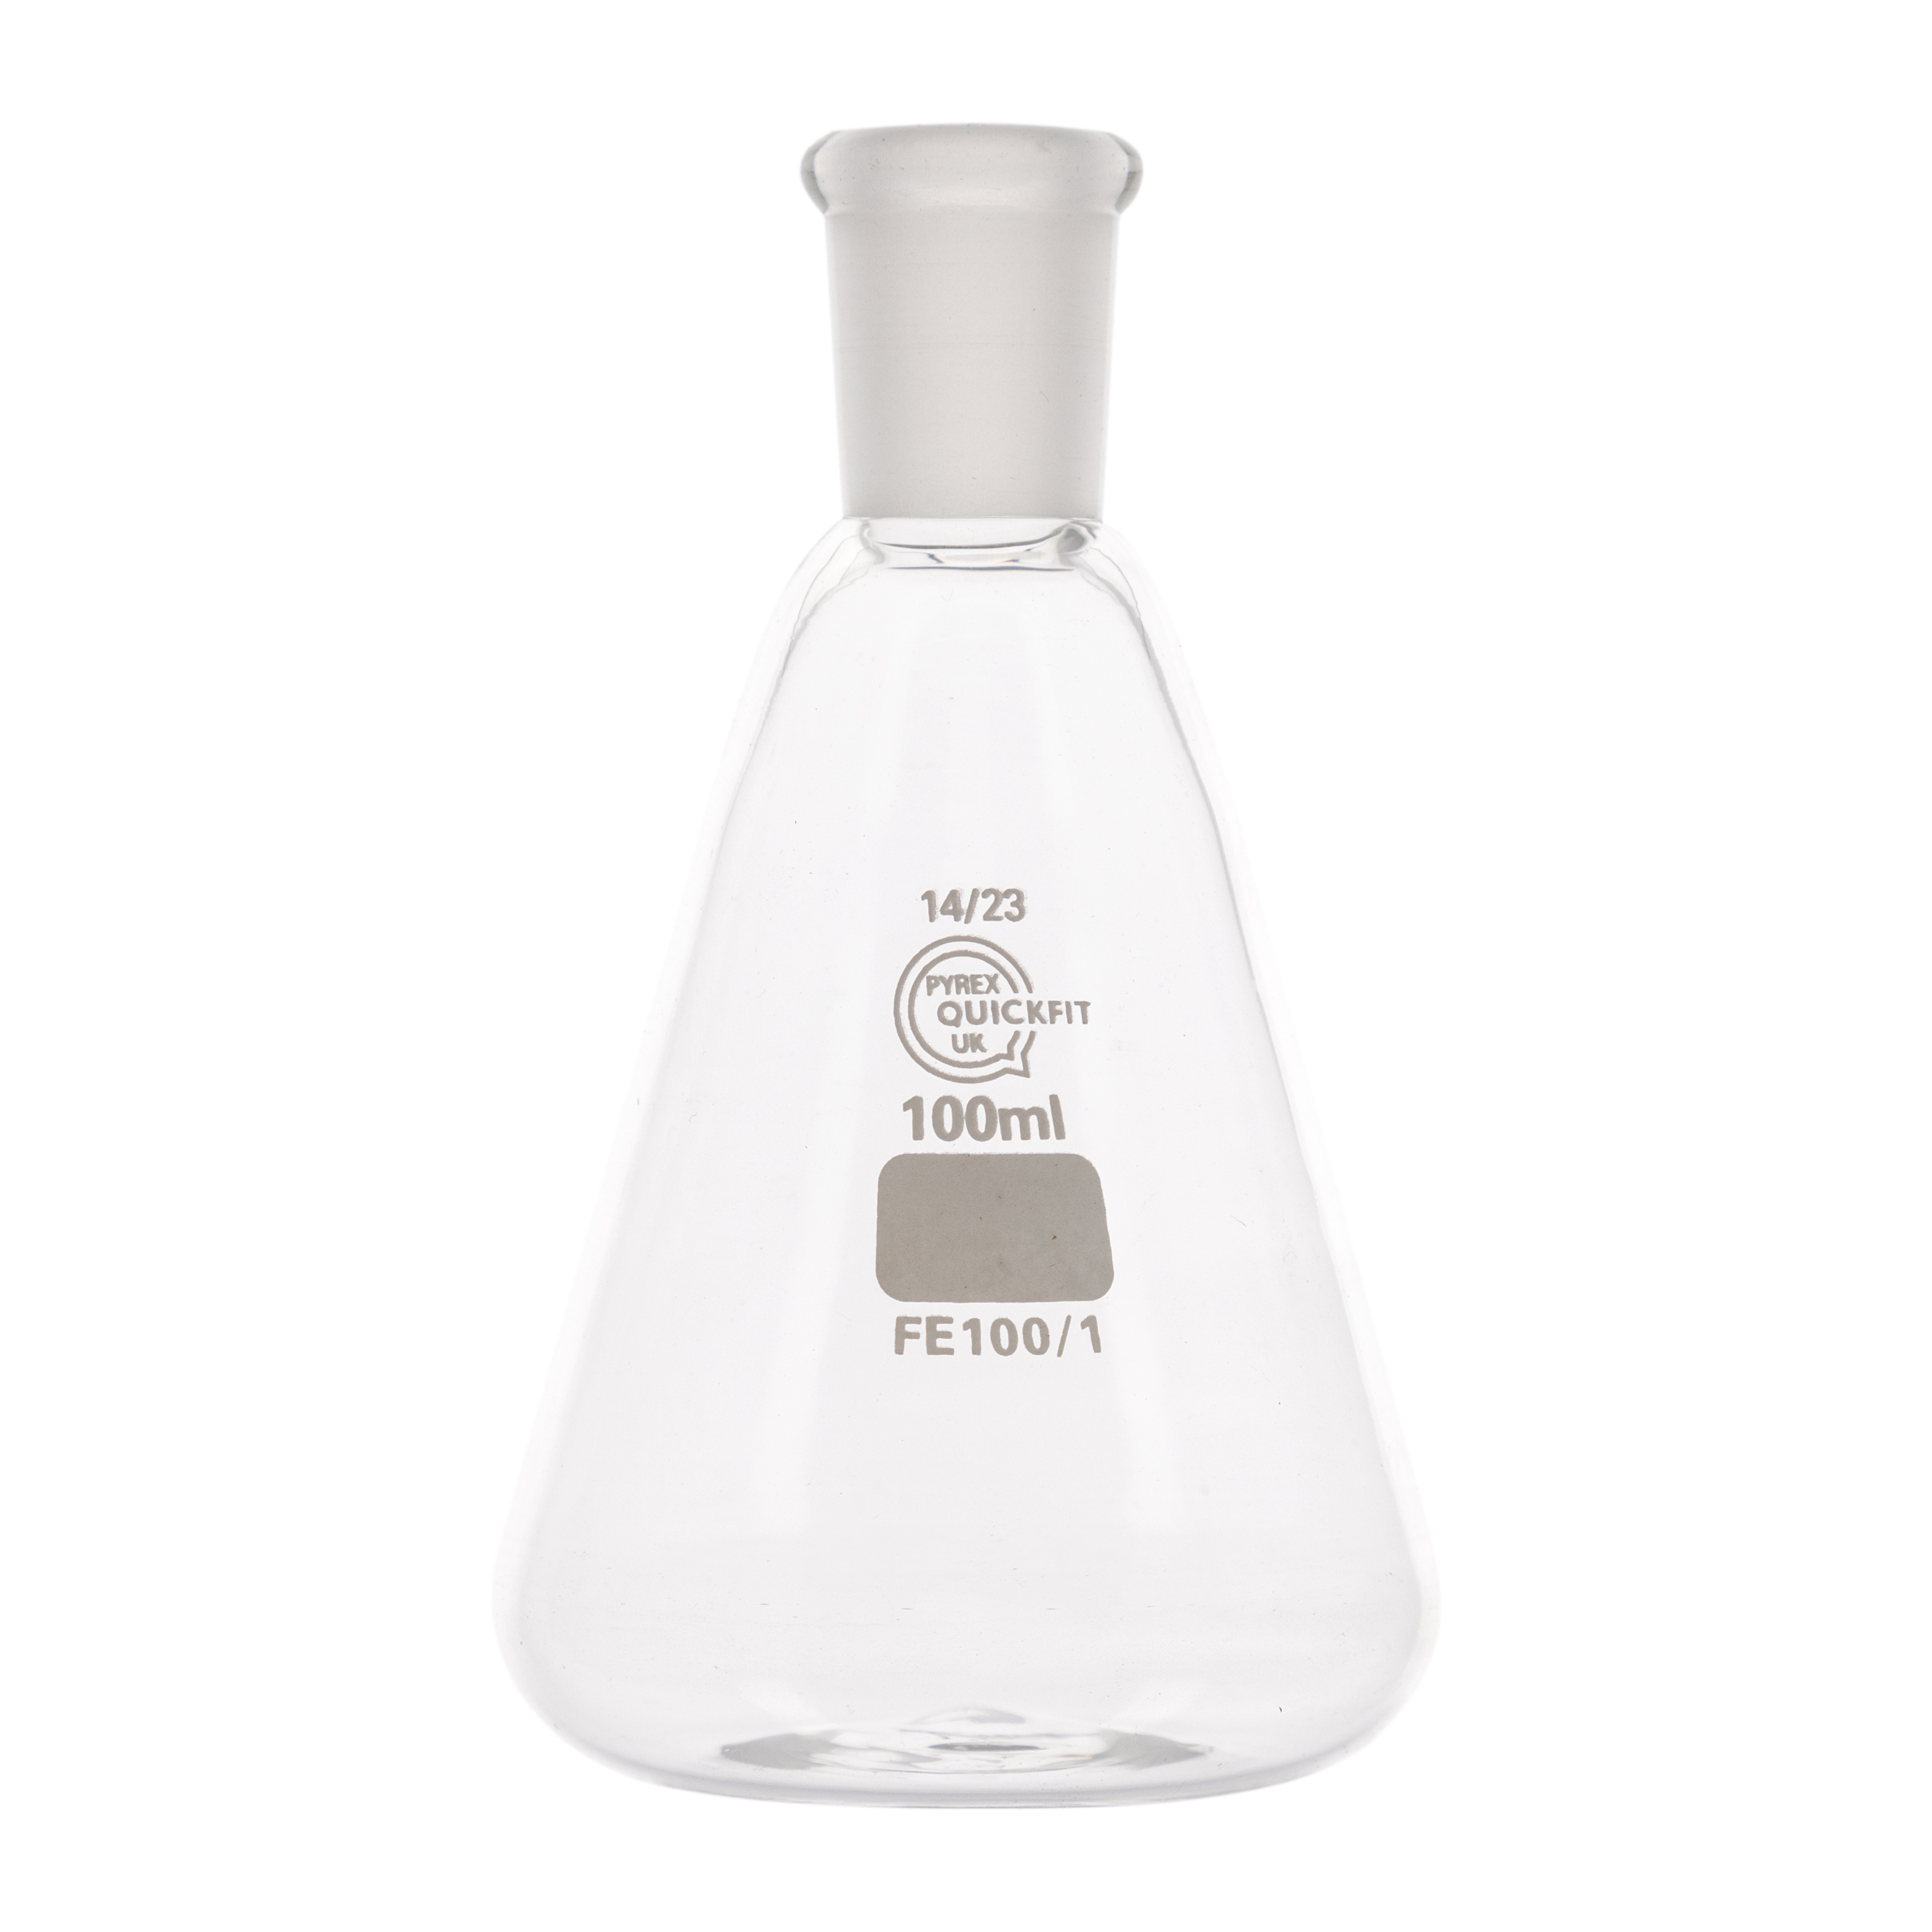 Quickfit Conical Flask - 100ml 14-23